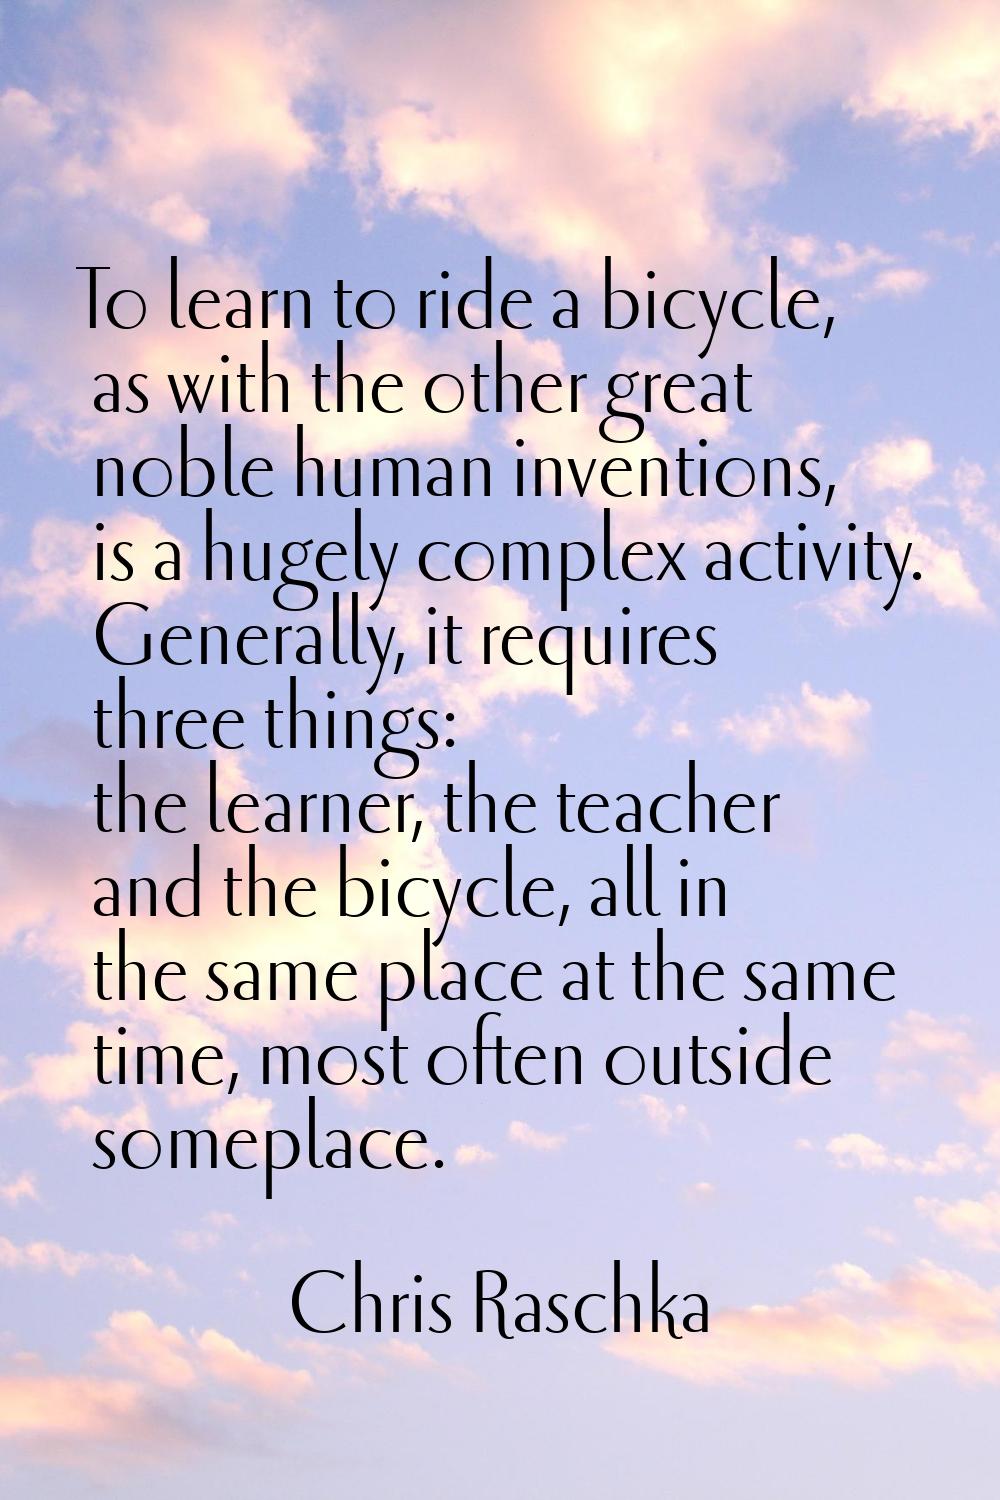 To learn to ride a bicycle, as with the other great noble human inventions, is a hugely complex act